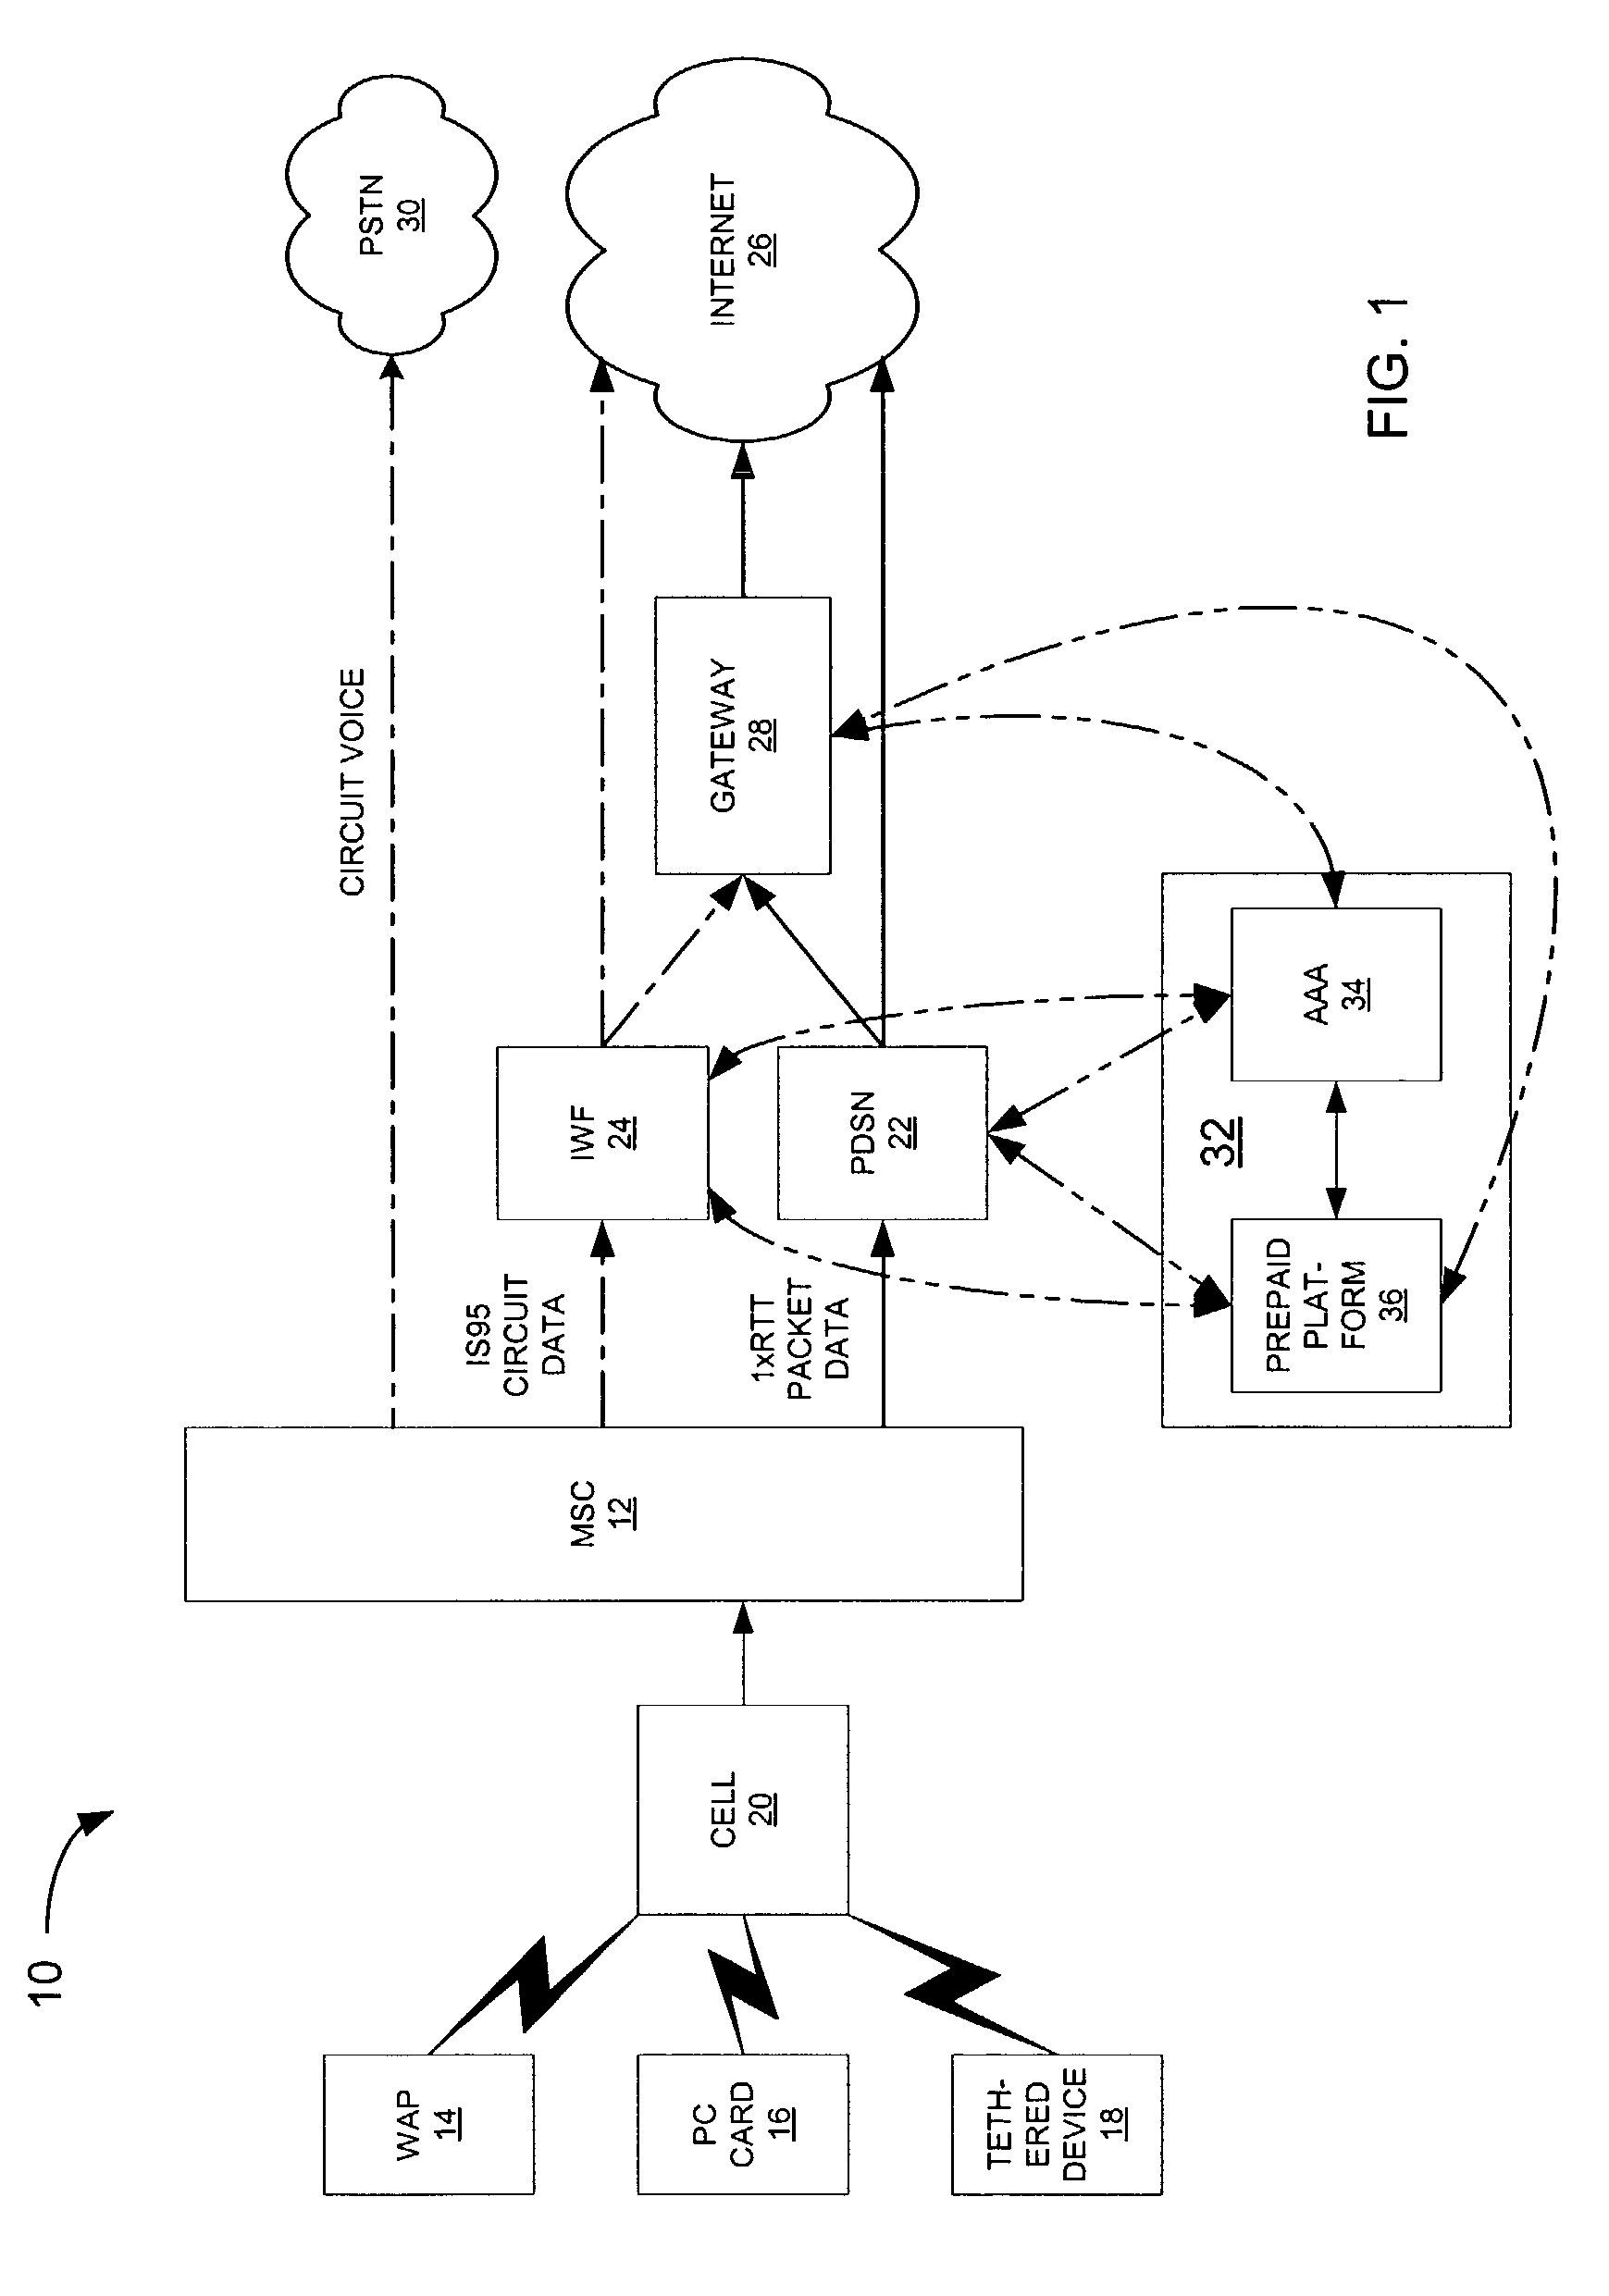 Method of and system for processing prepaid wireless data communications